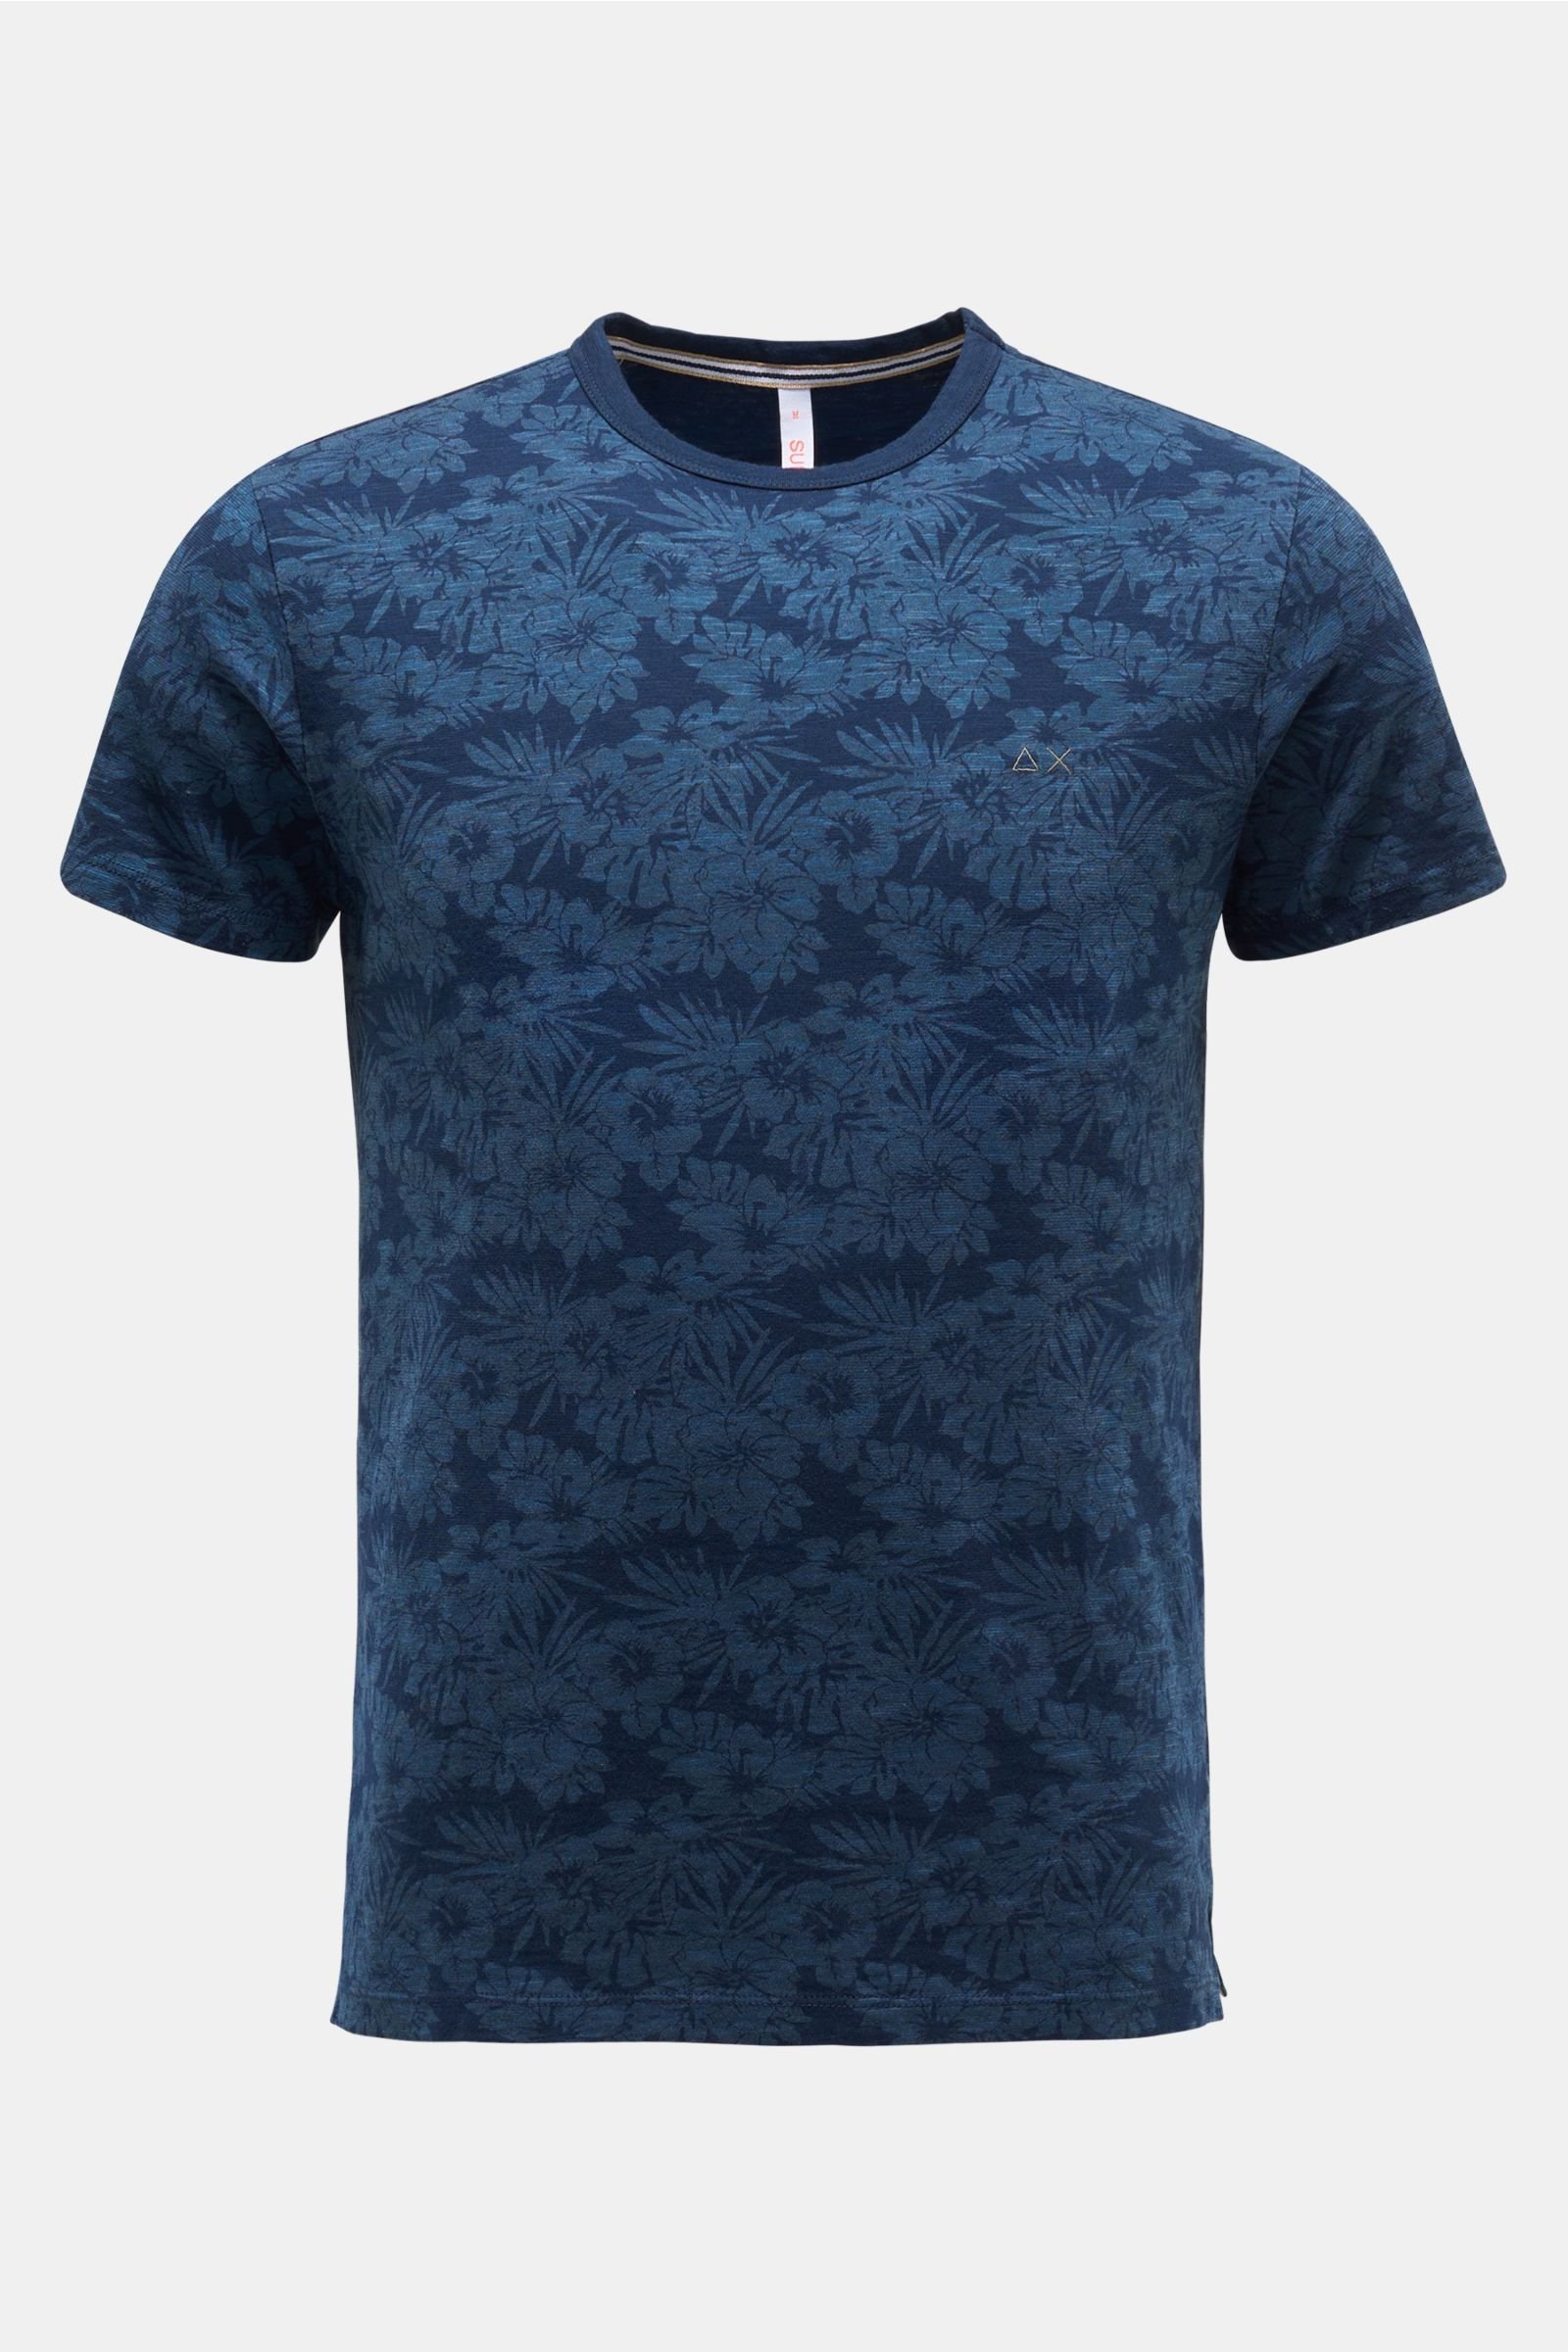 Crew neck T-shirt navy patterned